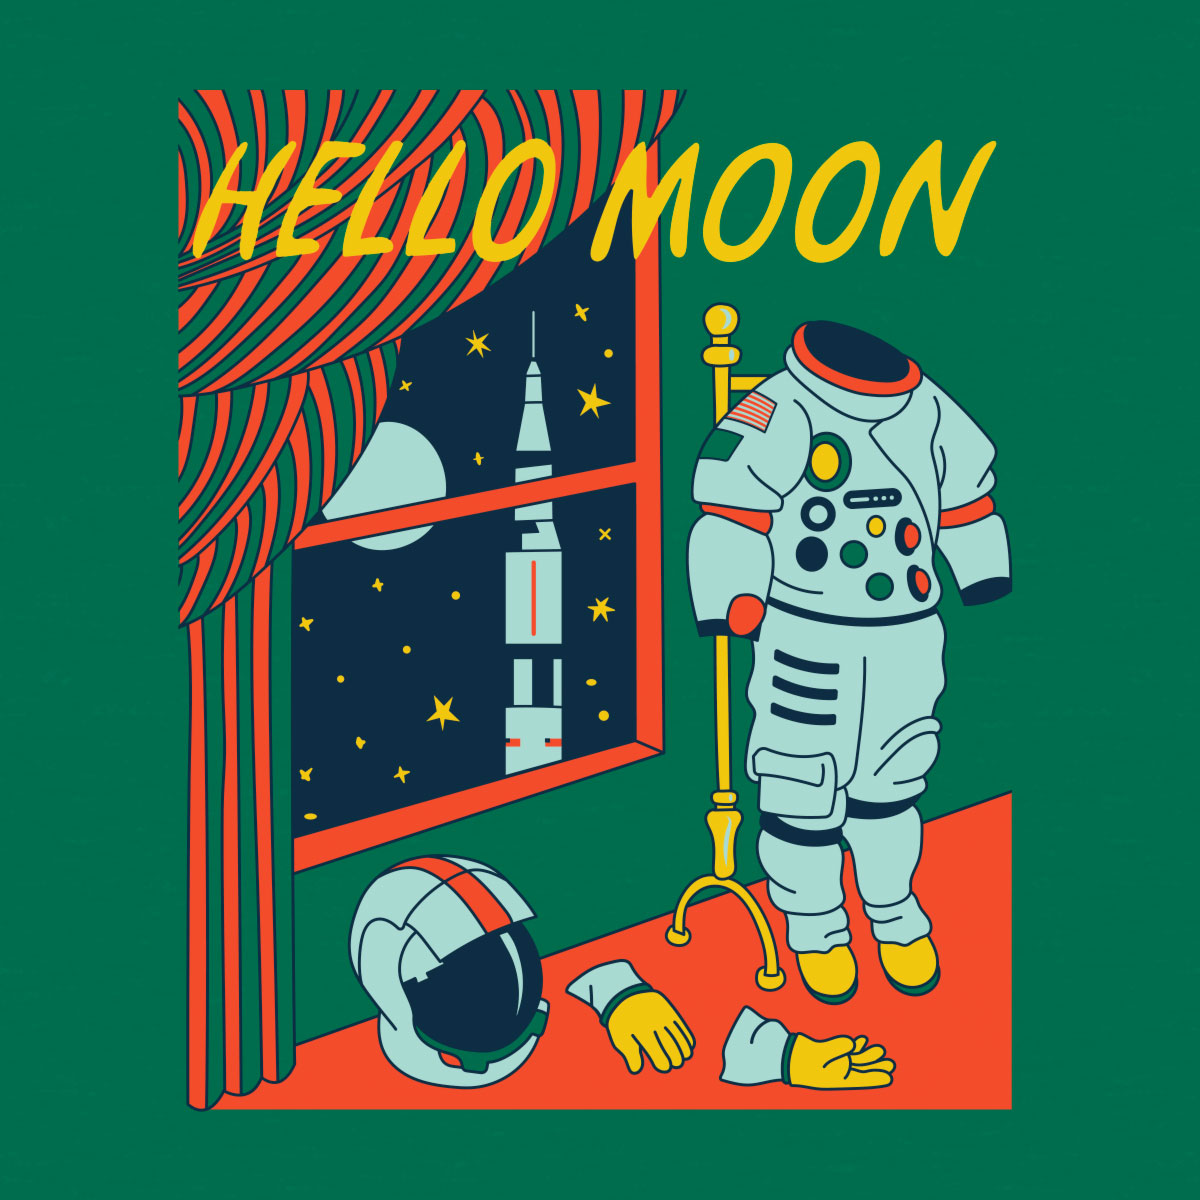 The text "Hello Moon" with an astronaut suit and rocket. In the "goodnight moon" book style on a green background